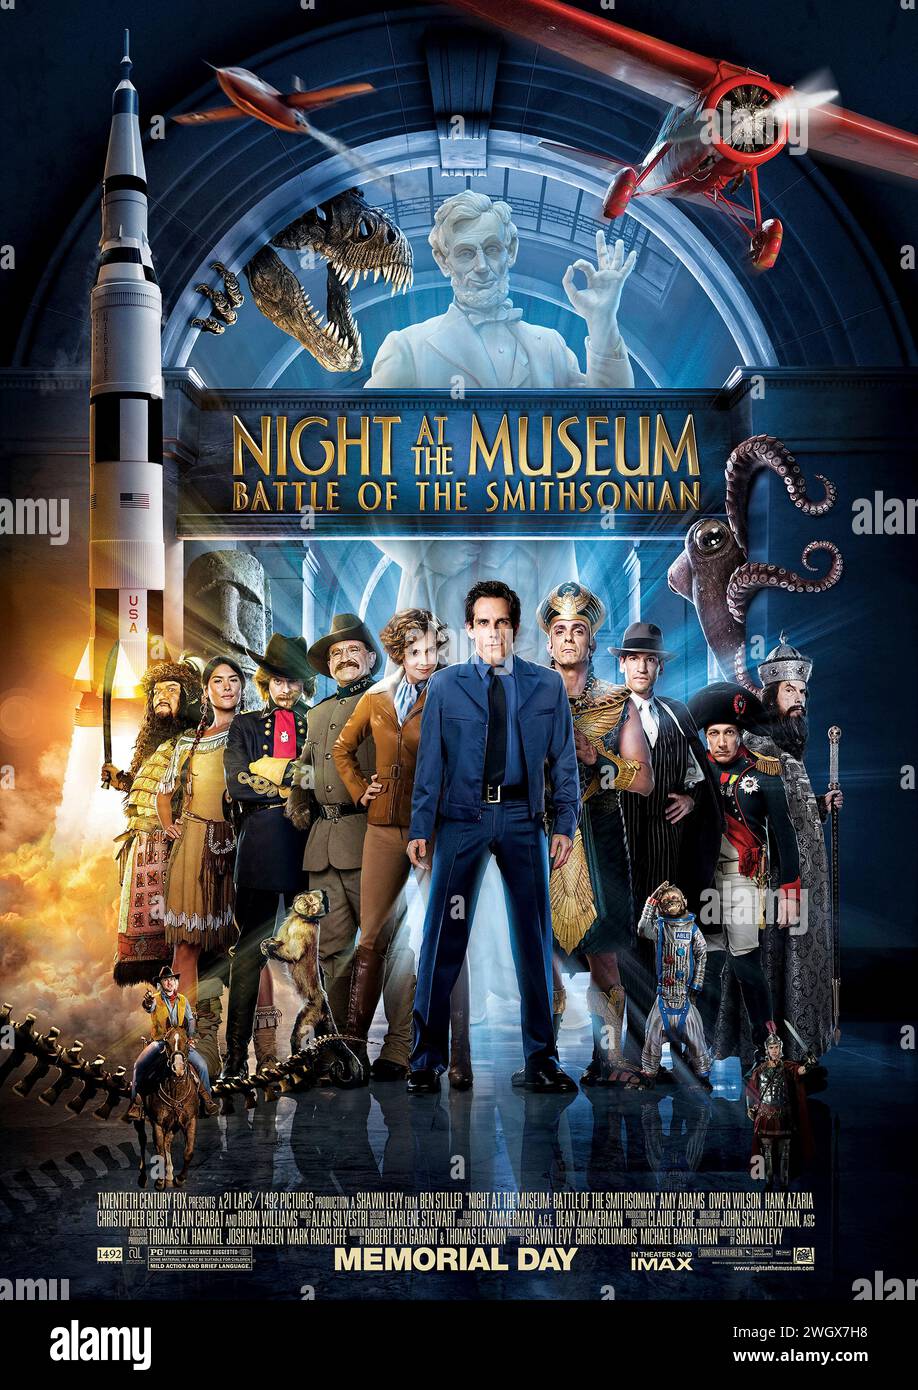 Night at the Museum: Battle of the Smithsonian (2009) directed by Shawn Levy and starring Ben Stiller, Owen Wilson and Amy Adams. Security guard Larry Daley infiltrates the Smithsonian Institution in order to rescue Jedediah and Octavius, who have been shipped to the museum by mistake. US one sheet poster ***EDITORIAL USE ONLY***. Credit: BFA / 20th Century Fox Stock Photo